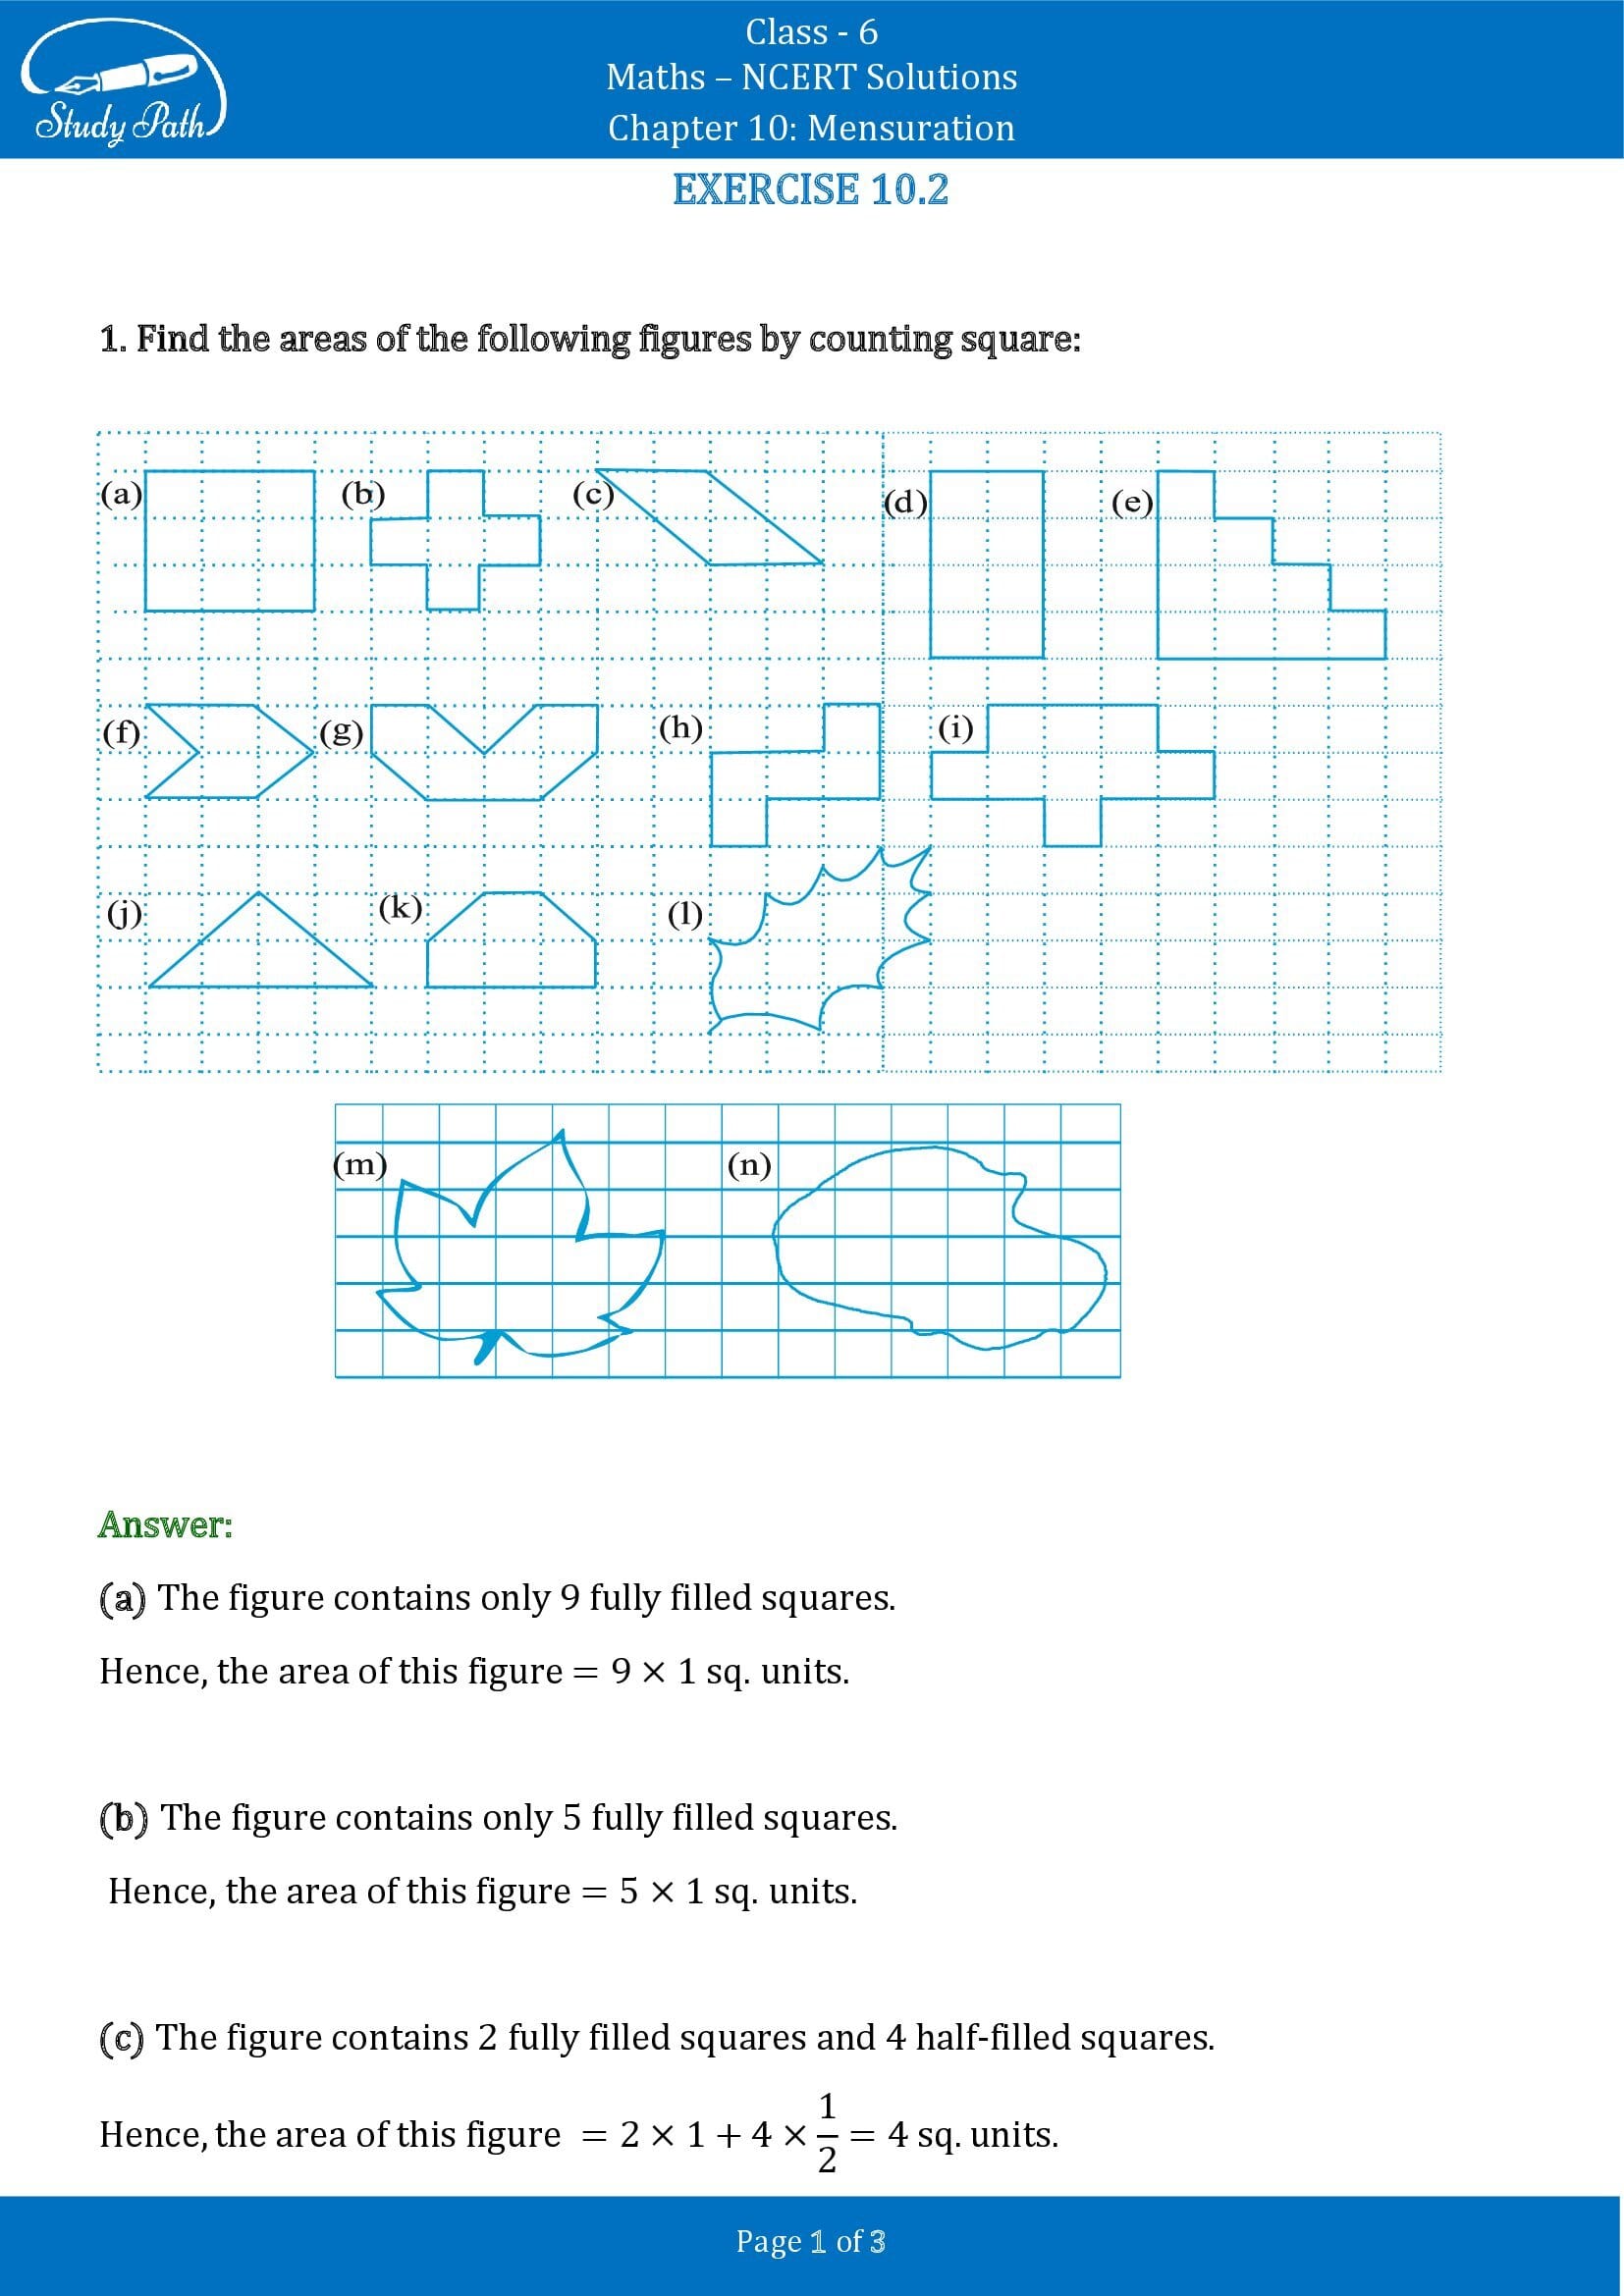 NCERT Solutions for Class 6 Maths Chapter 10 Mensuration Exercise 10.2 00001